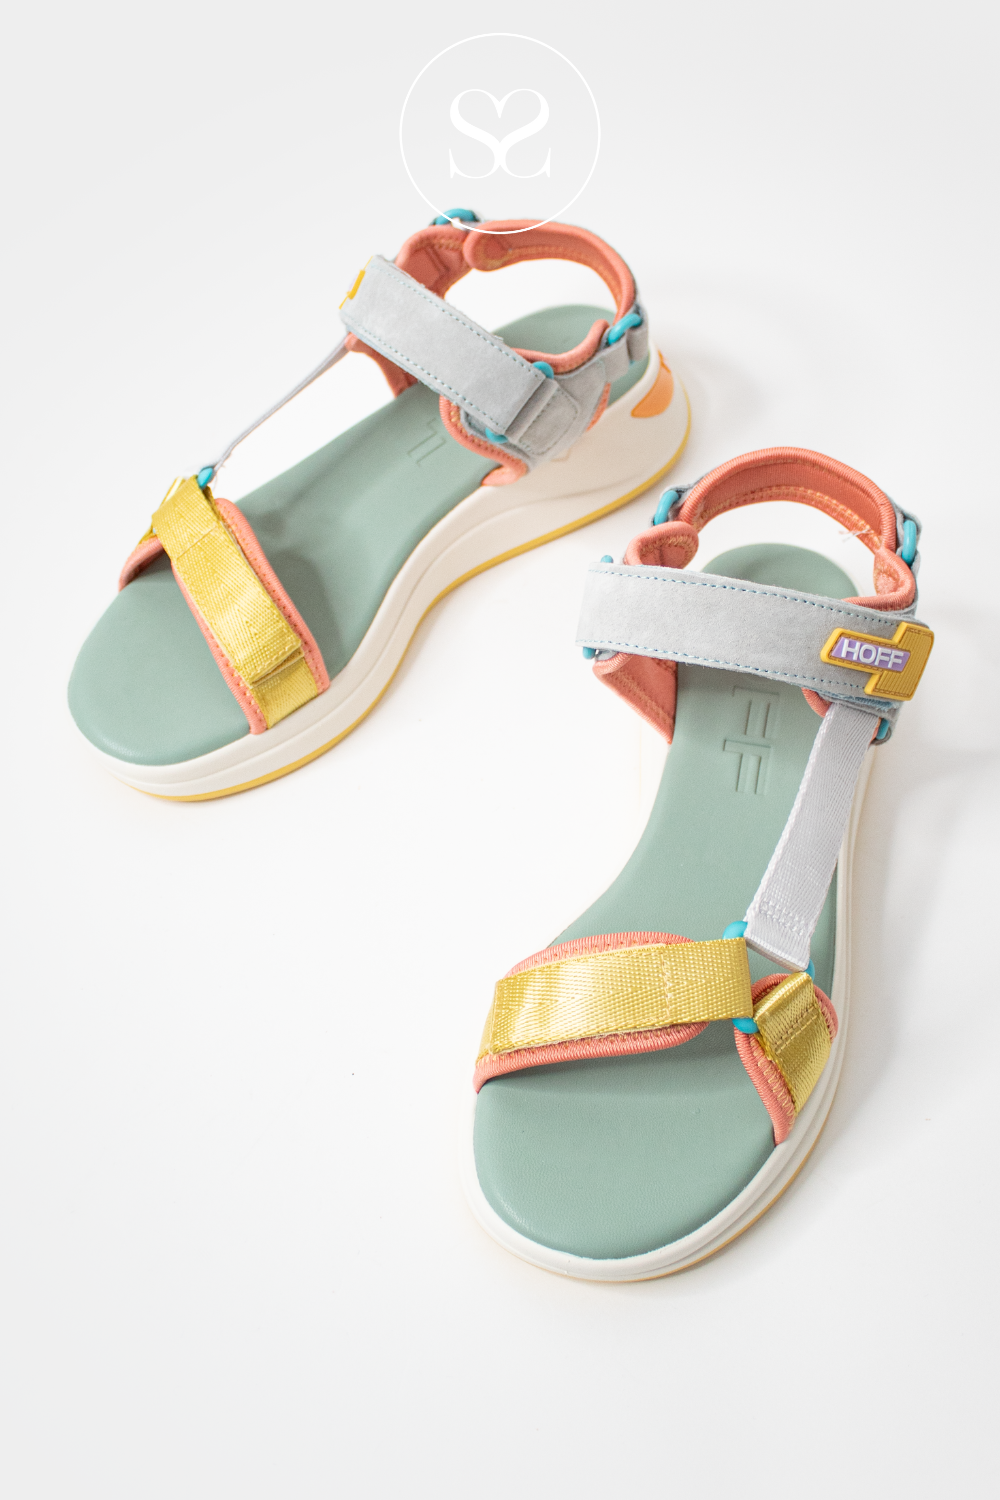 COMFORTABLE FLAT SANDALS FROM HOFF IDEAL FOR WALKING